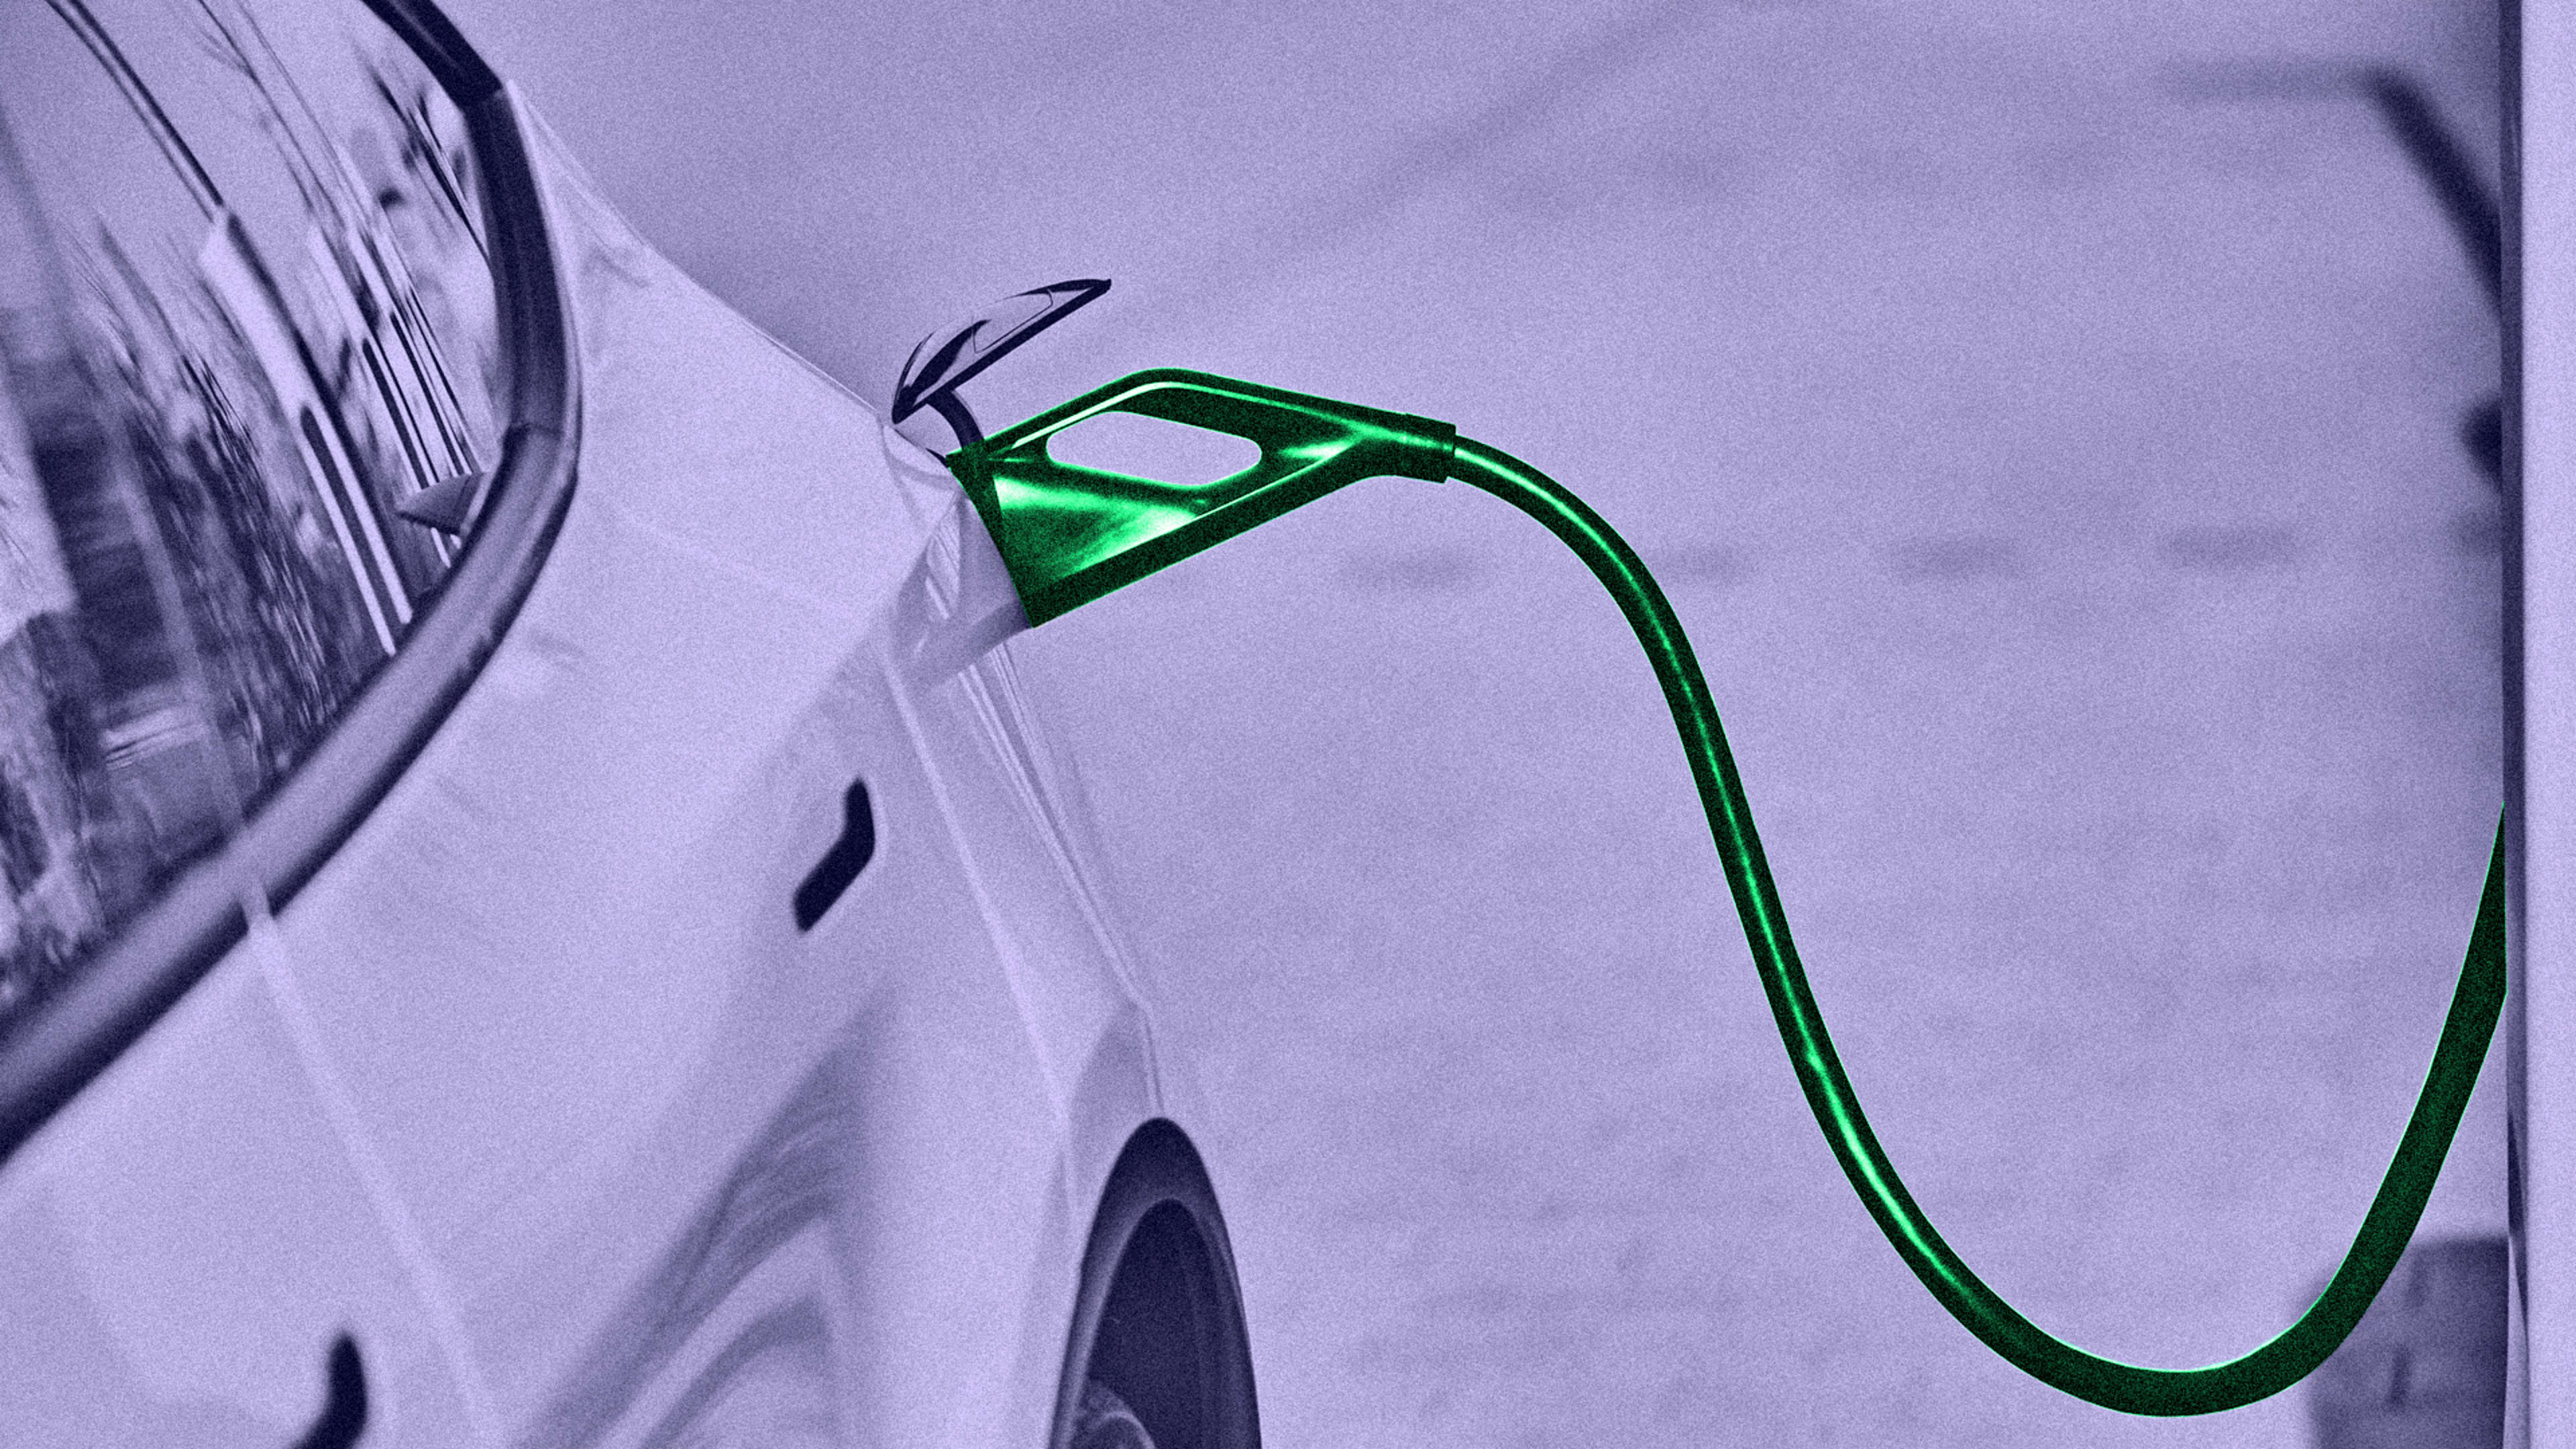 Operations experts on how the U.S. can make EVs without China’s supply chain